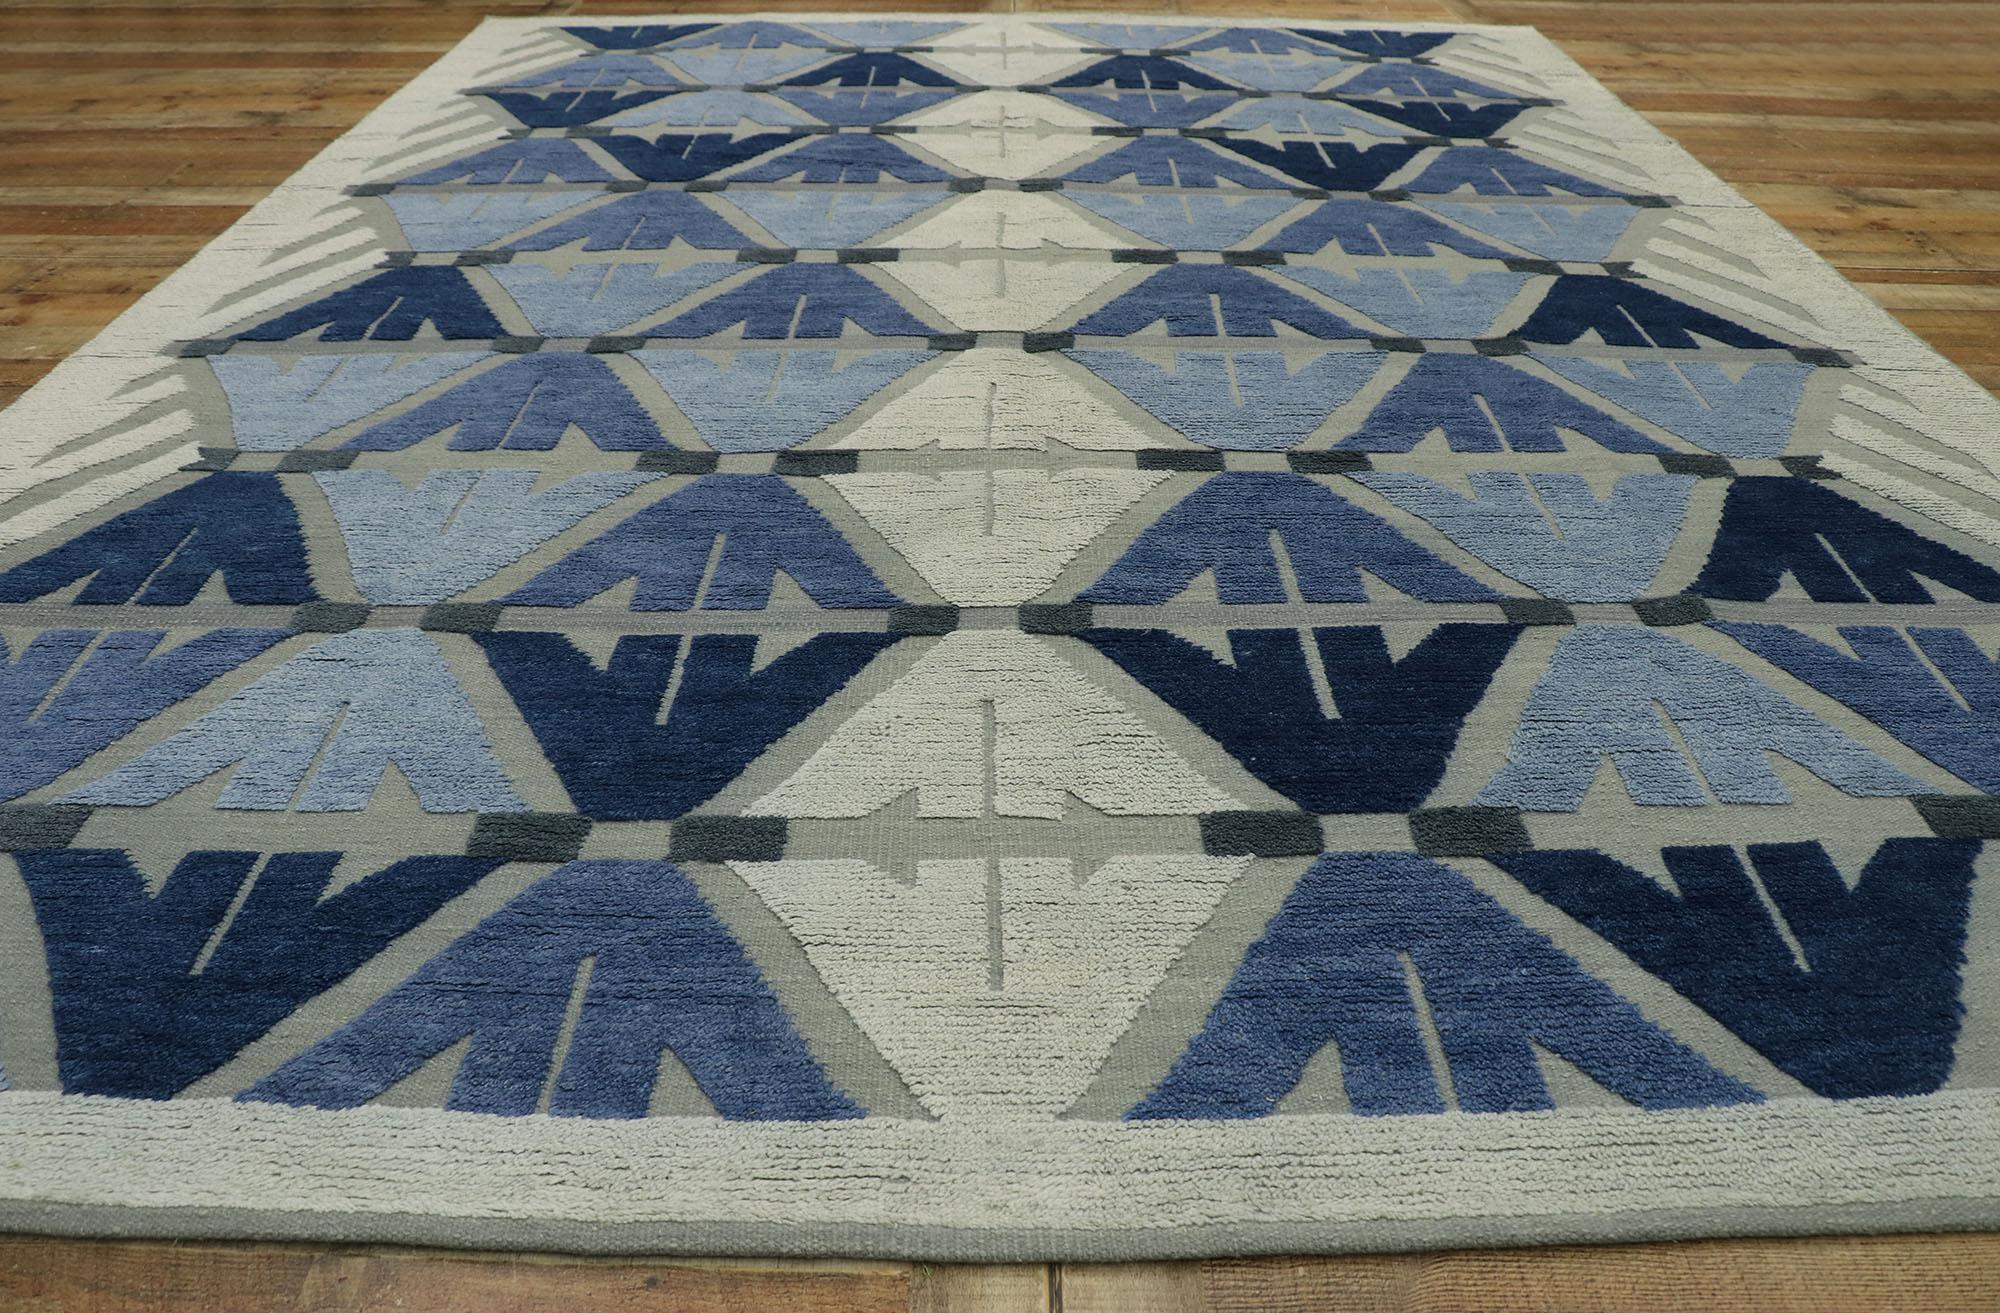 New Contemporary Indian Kilim Souf Rug with Raised Geometric Design 2